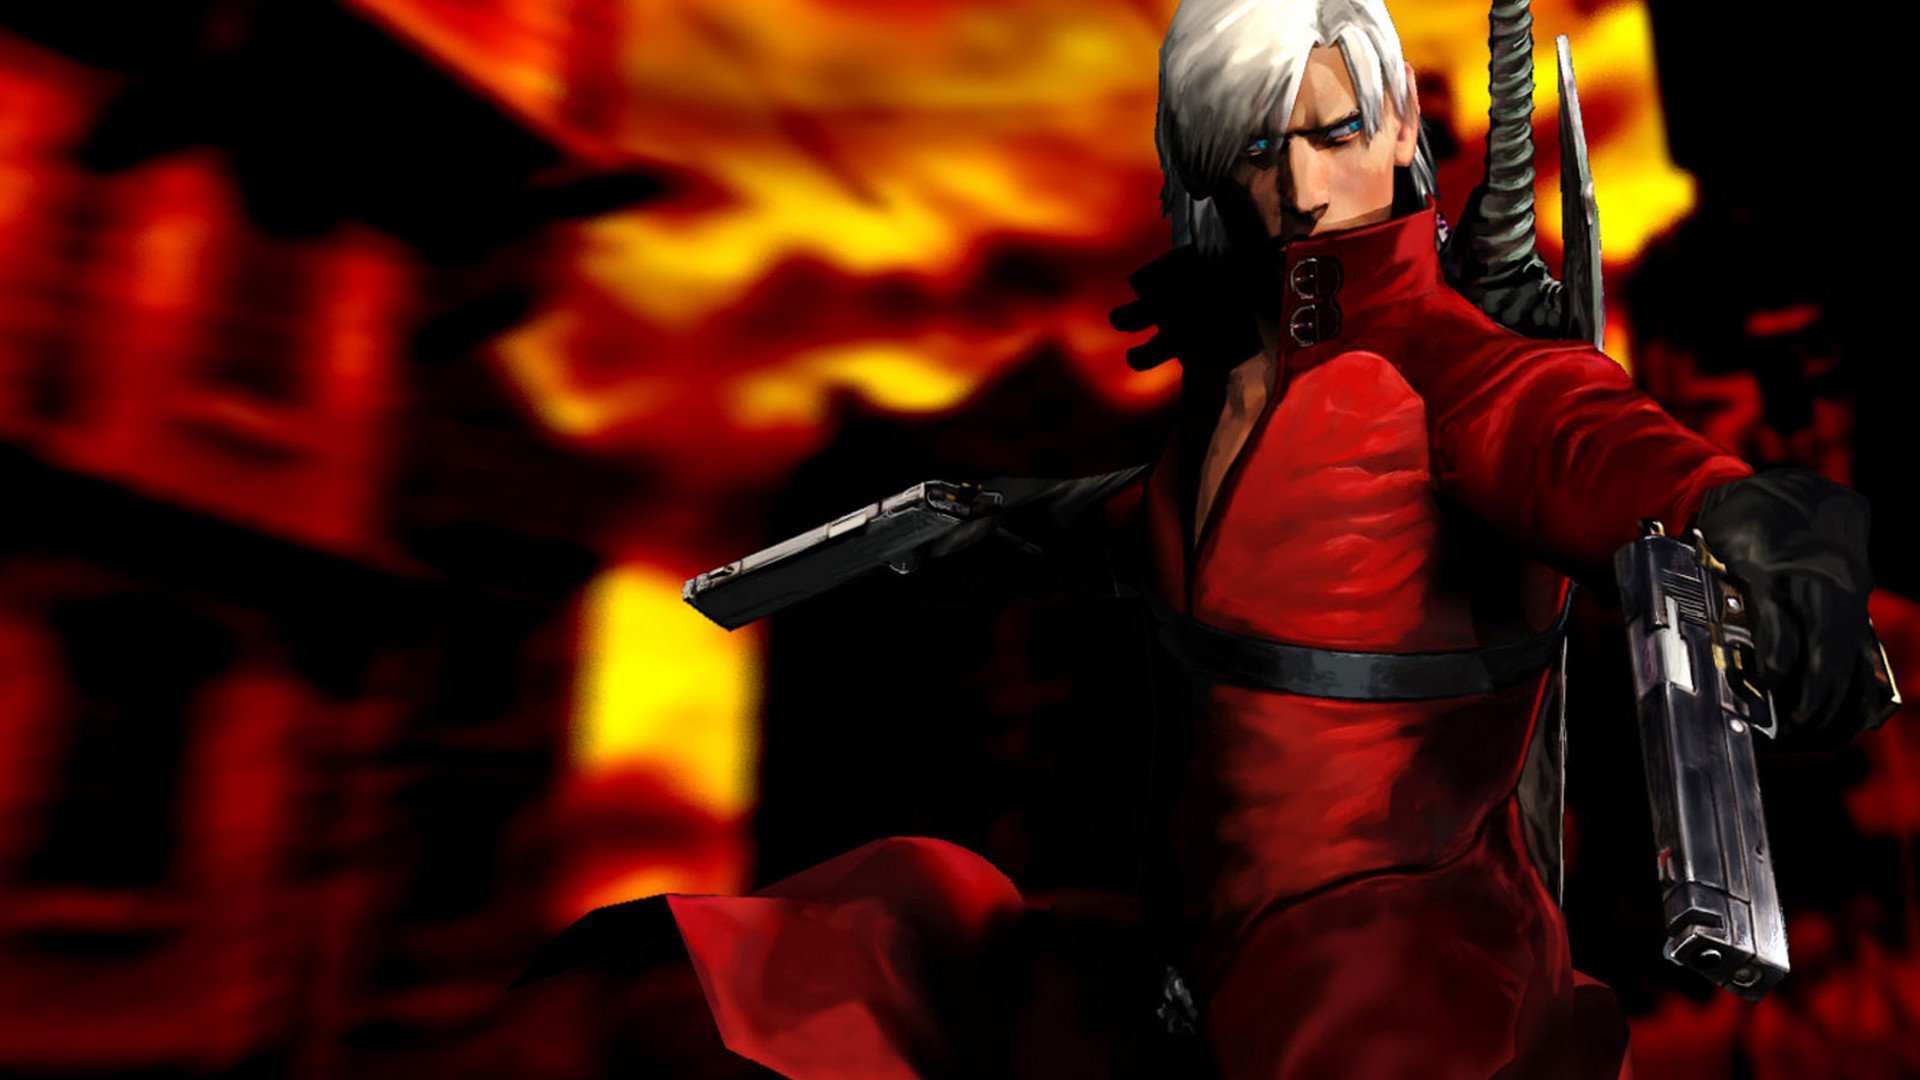 Devil may cry hd paper